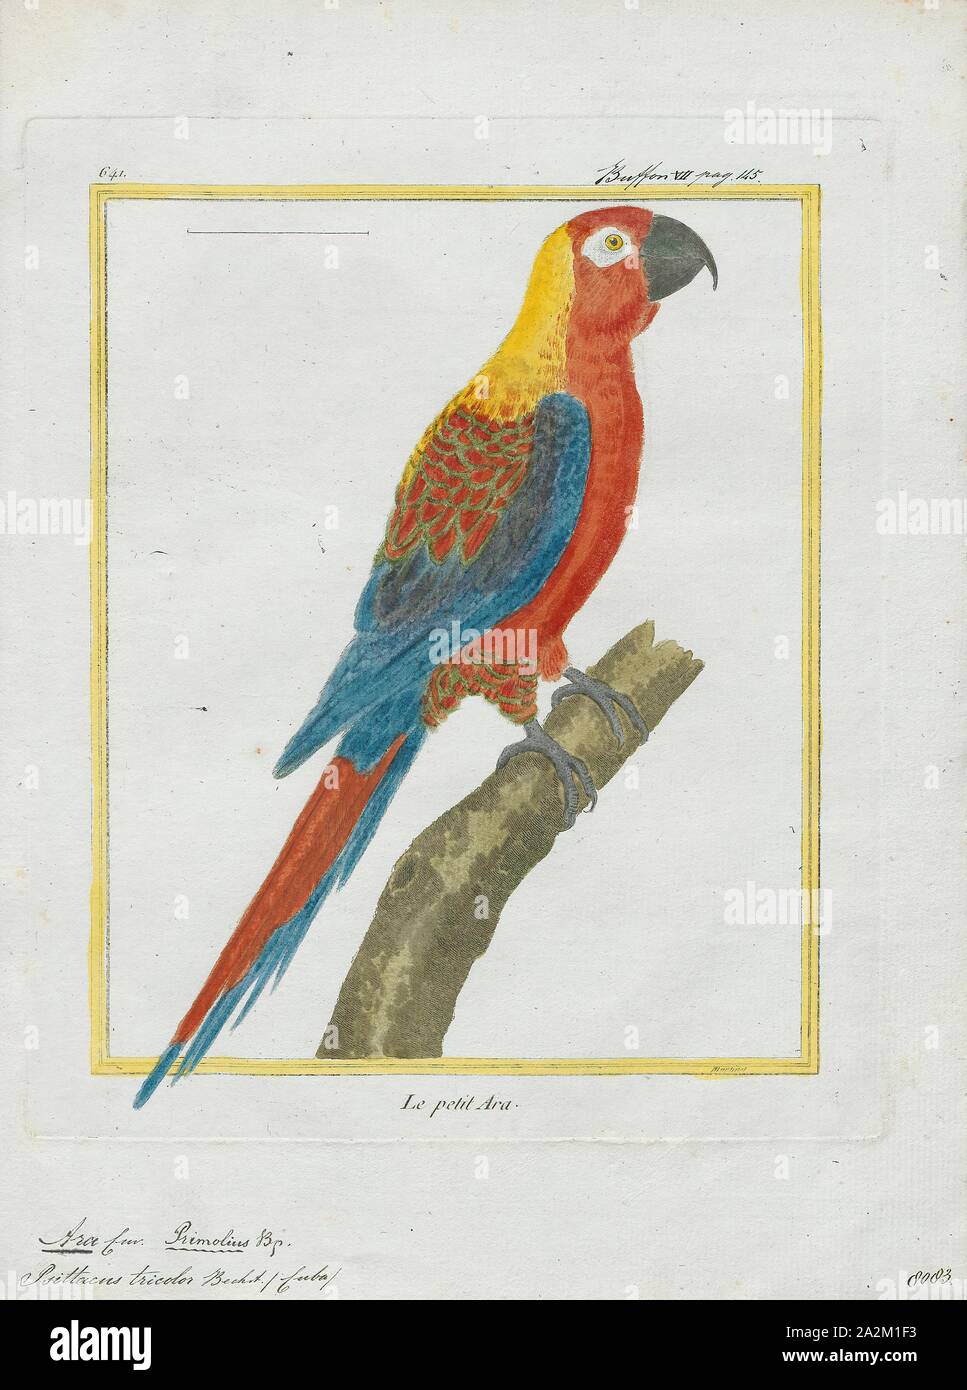 Ara tricolor, Print, The Cuban macaw or Cuban red macaw (Ara tricolor) was a species of macaw native to the main island of Cuba and the nearby Isla de la Juventud that became extinct in the late 19th century. Its relationship with other macaws in its genus was long uncertain, but it was thought to have been closely related to the scarlet macaw, which has some similarities in appearance. It may also have been closely related, or identical, to the hypothetical Jamaican red macaw. A 2018 DNA study found that it was the sister species of two red and two green species of extant macaws., 1700-1880 Stock Photo